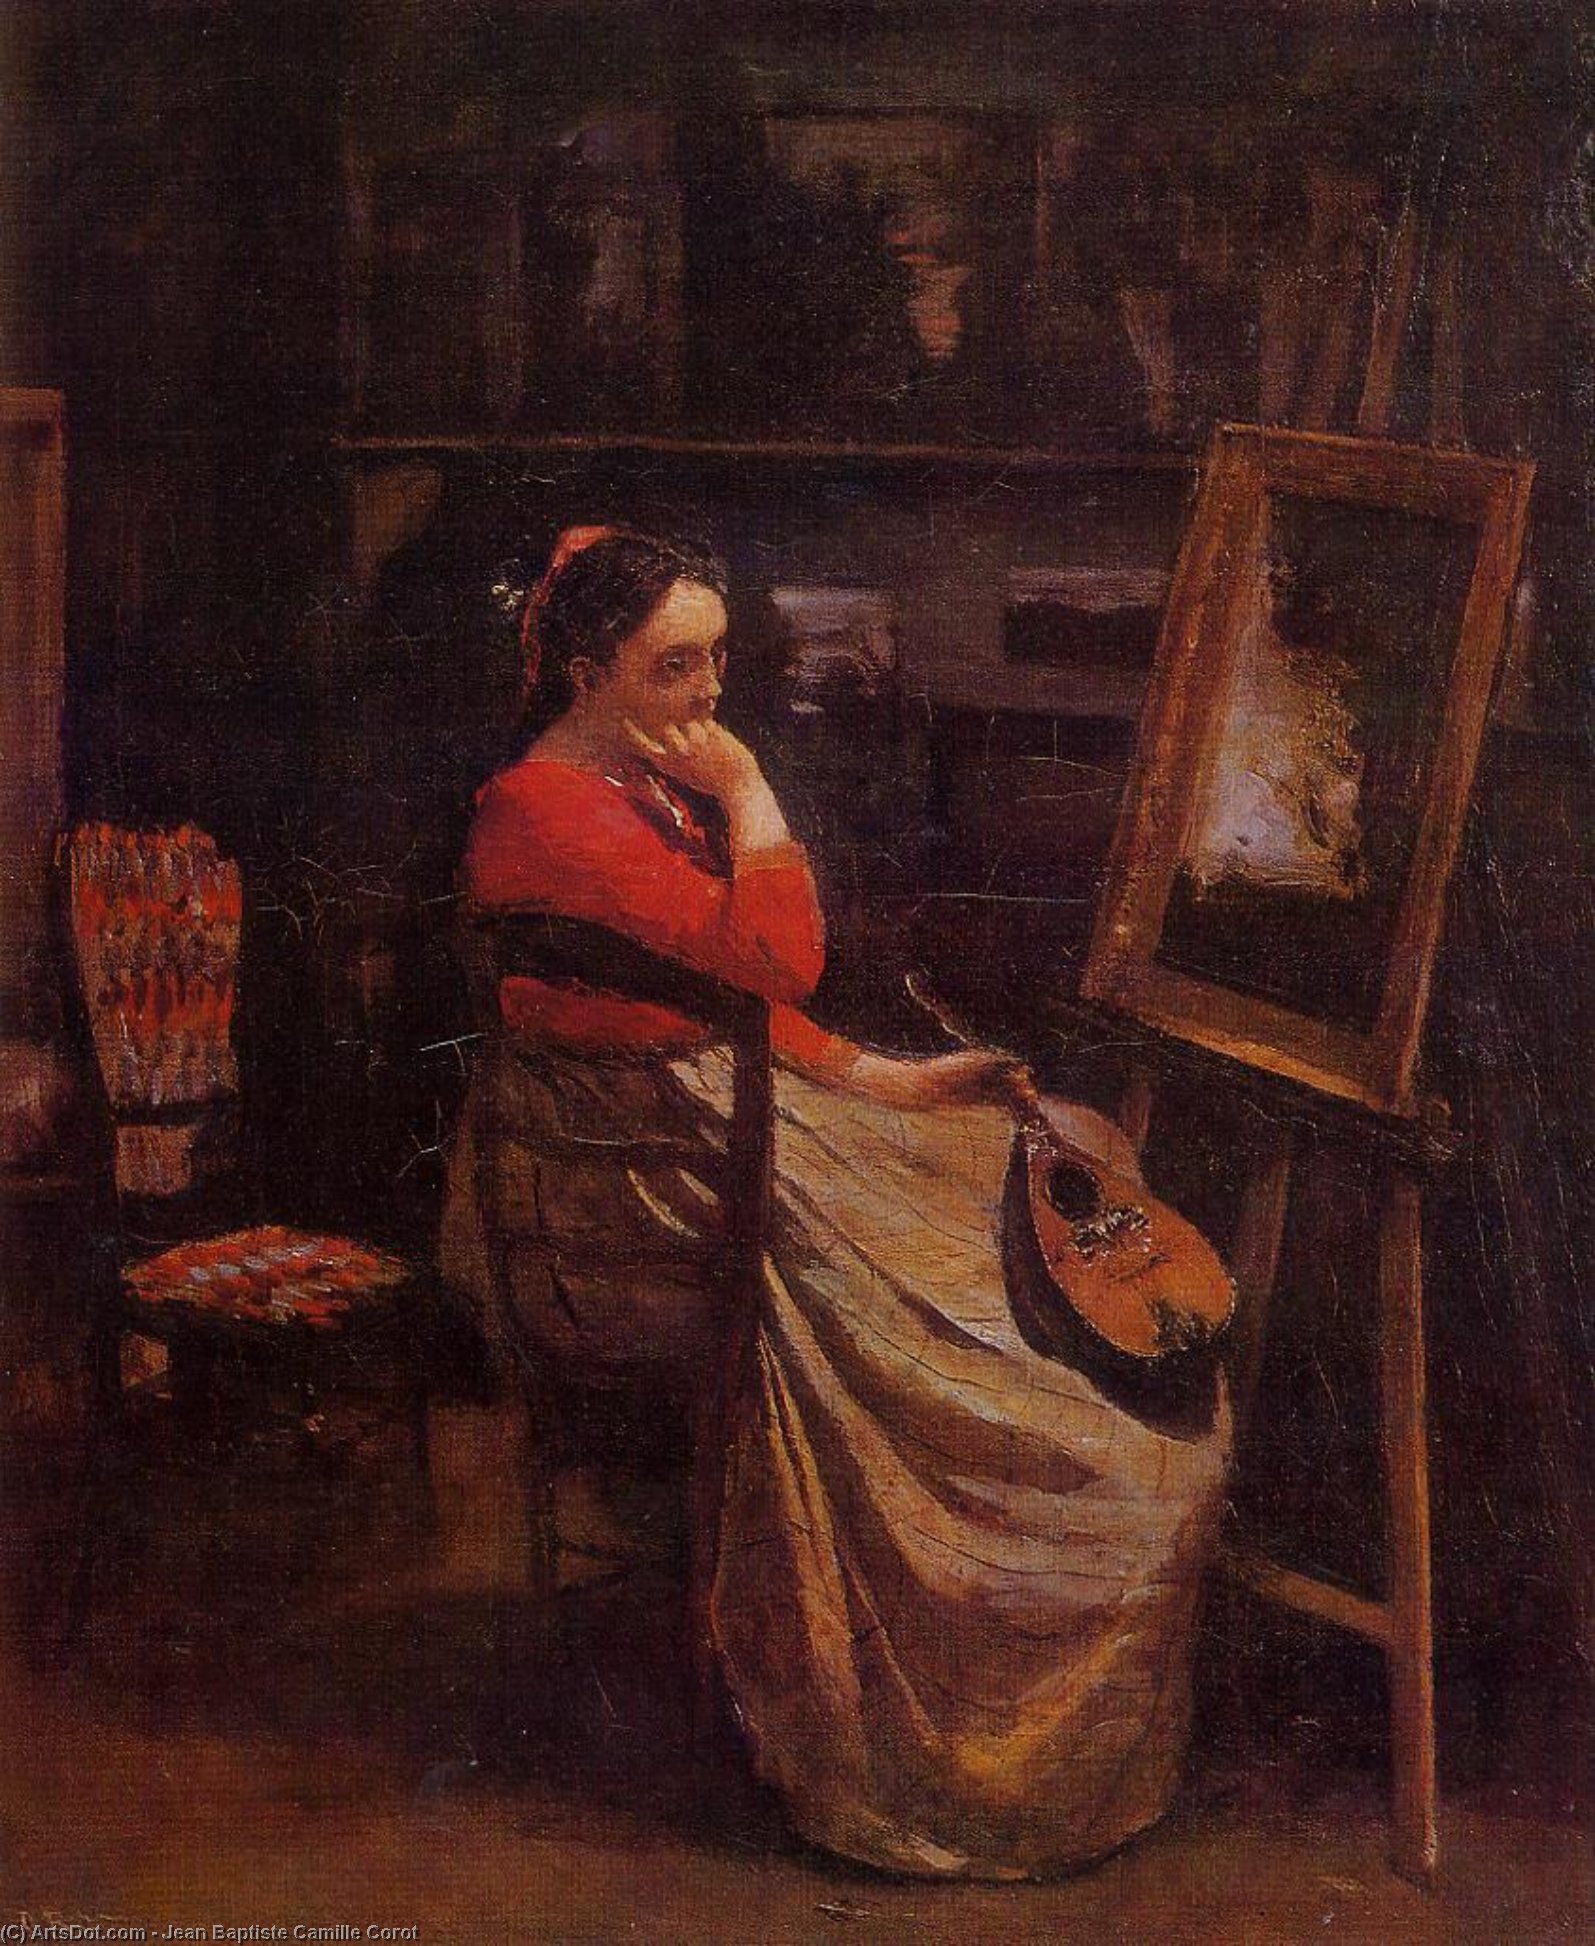 WikiOO.org - Encyclopedia of Fine Arts - Malba, Artwork Jean Baptiste Camille Corot - The Studio (also known as Young Woman with a Mandolin)